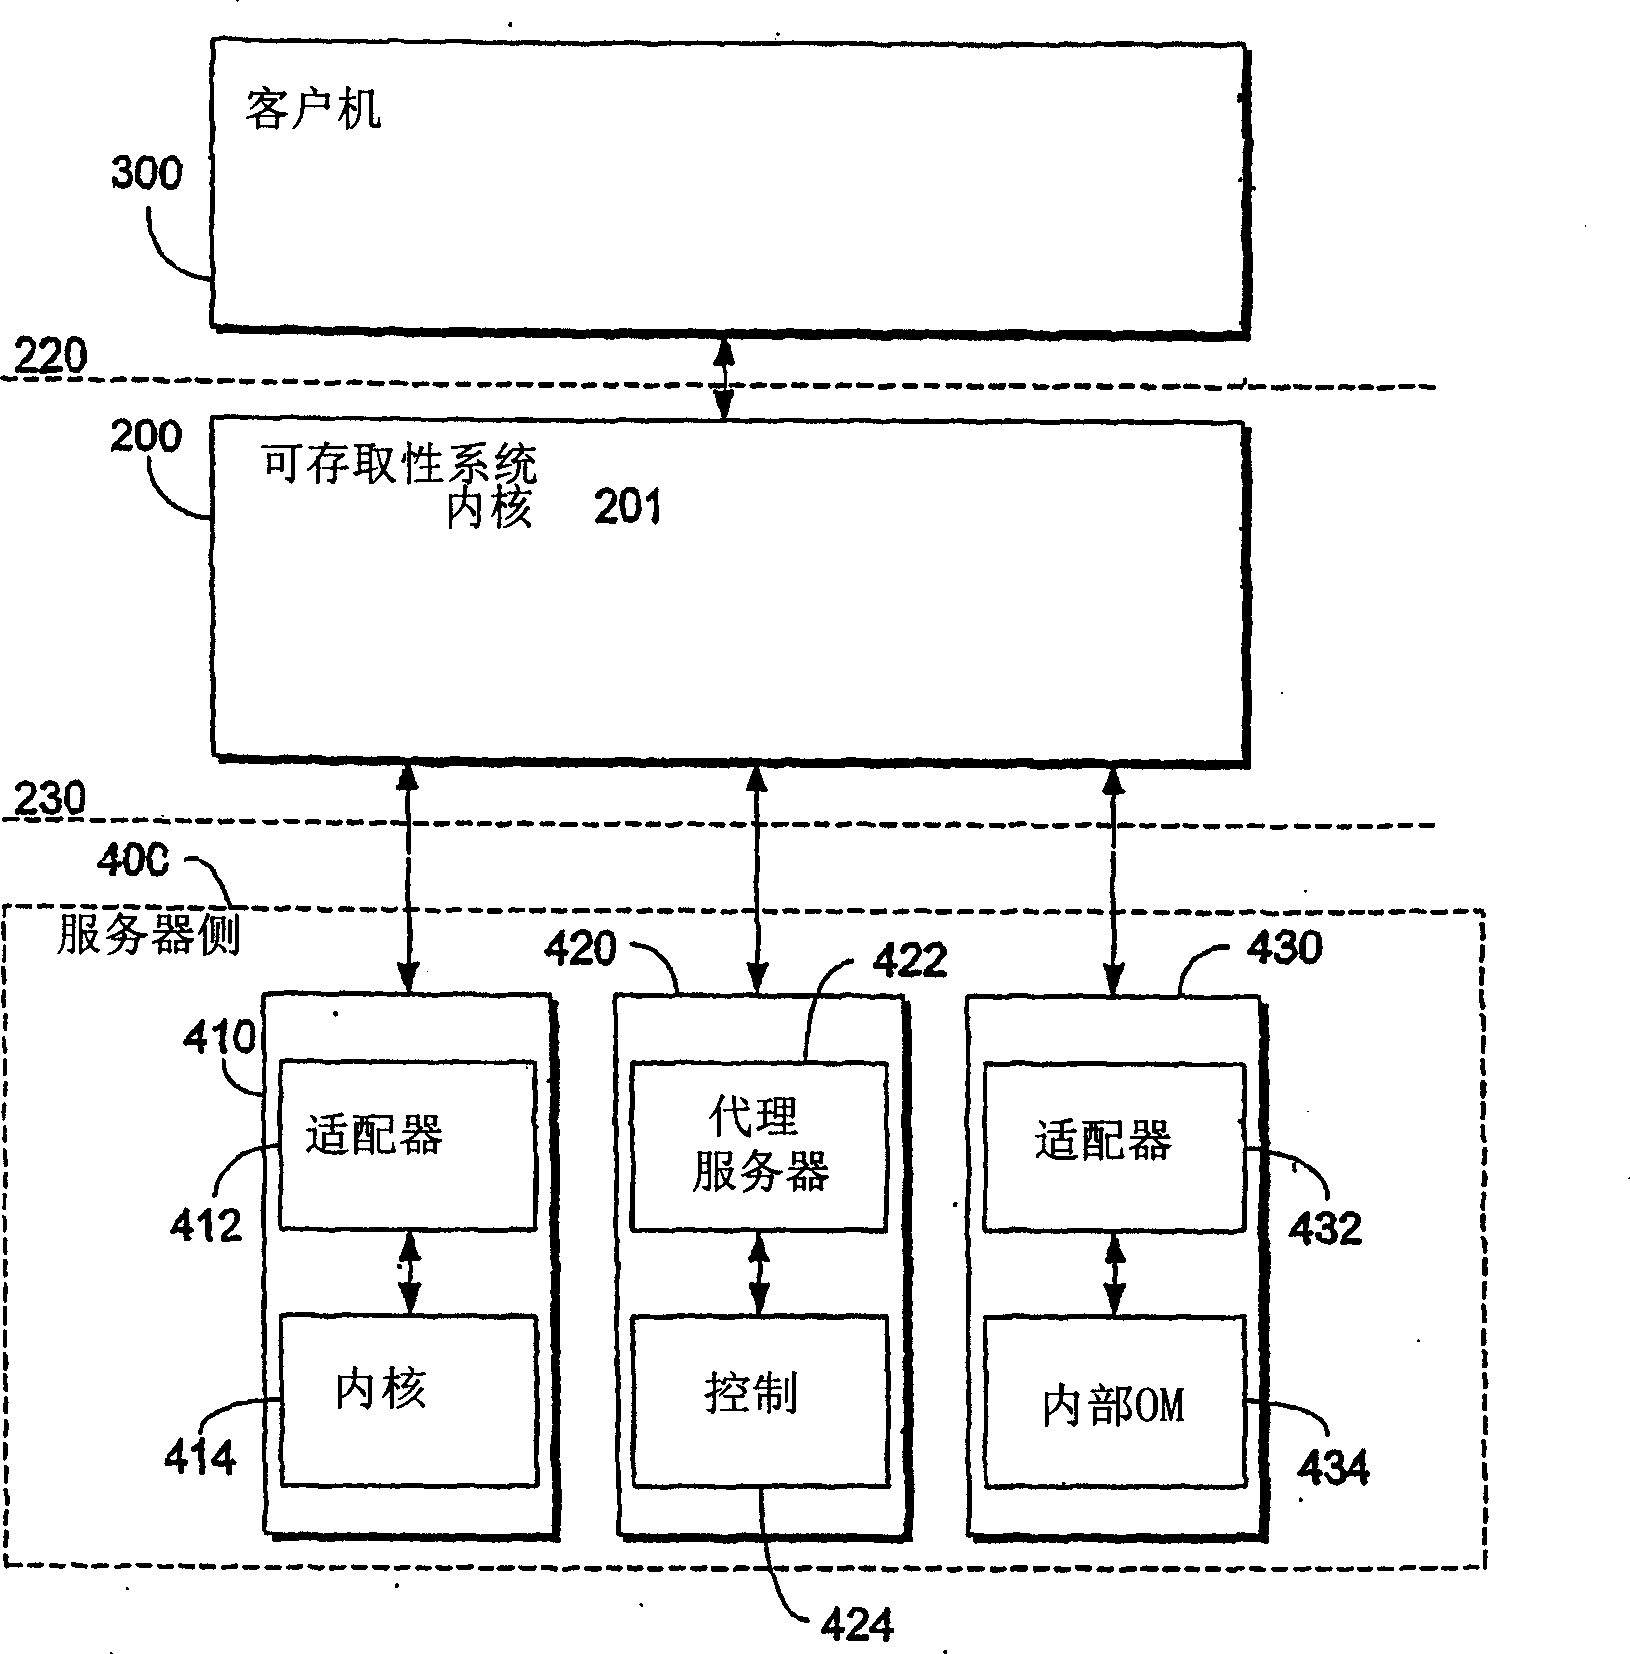 System and method for providing access to user interface information